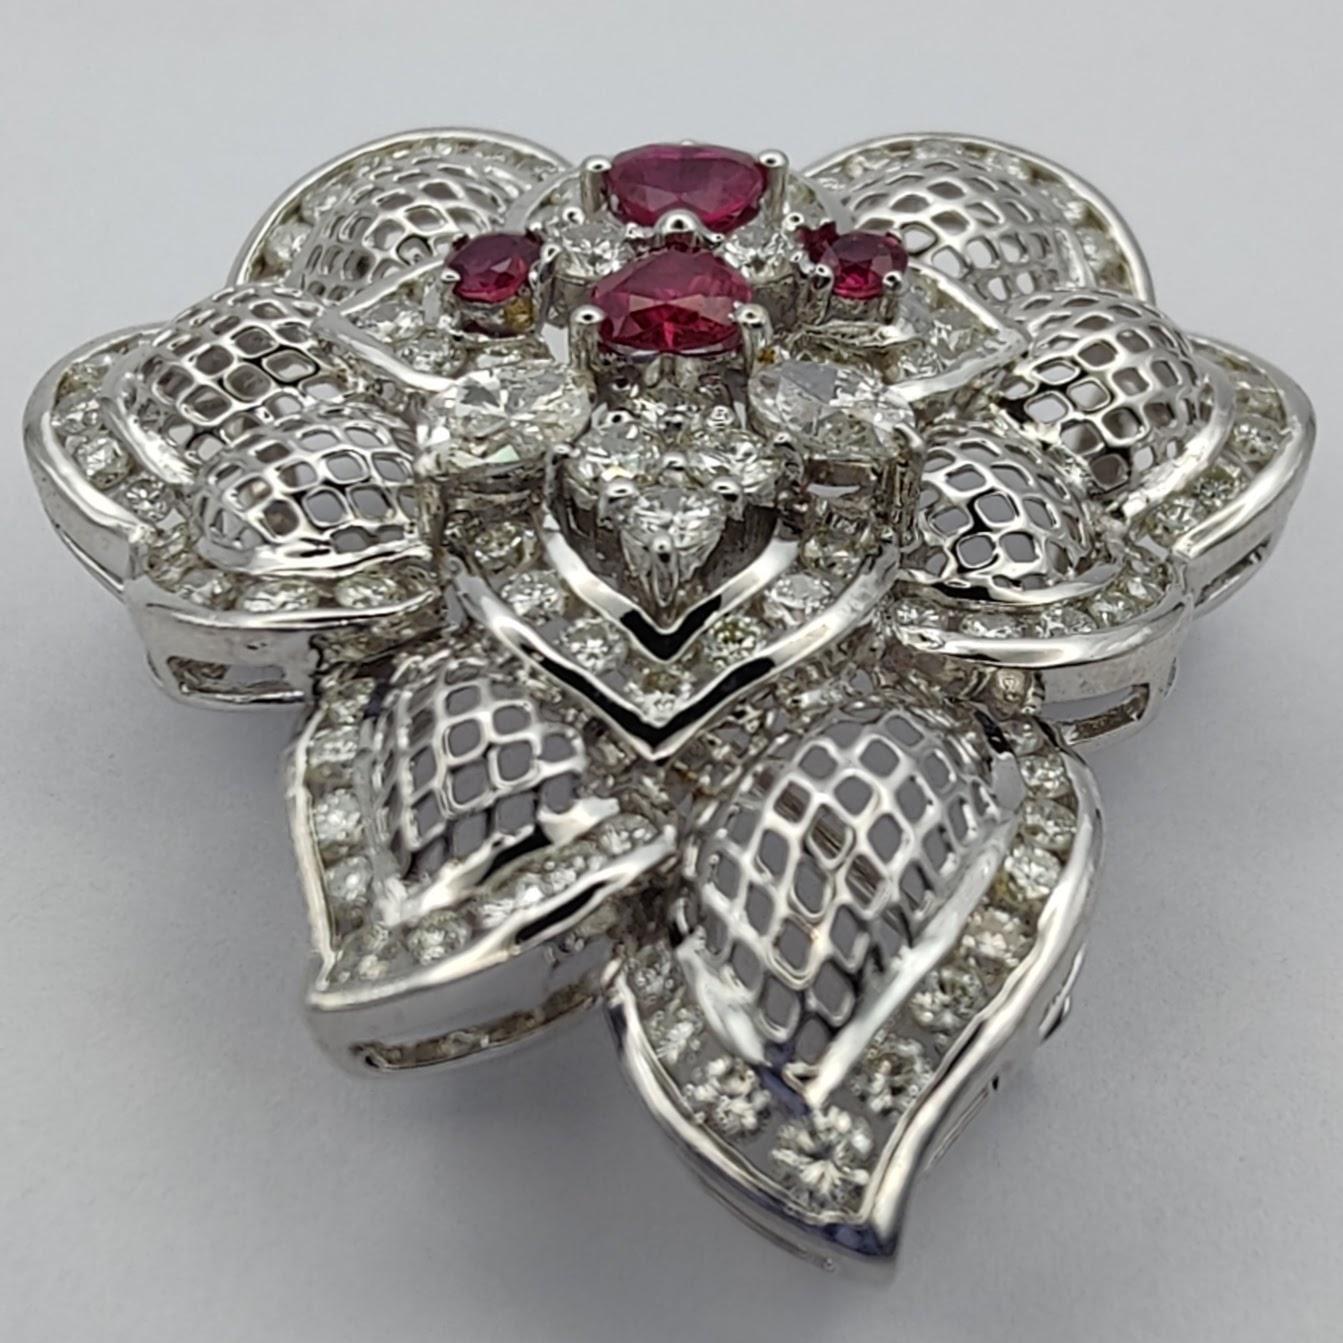 This stunning baroque pendant brooch is the perfect choice for adding a touch of sophistication and glamour to your look. The brooch features a 0.78 carat ruby set in a 2.7 carat diamond design, giving it a sparkling and eye-catching finish. The